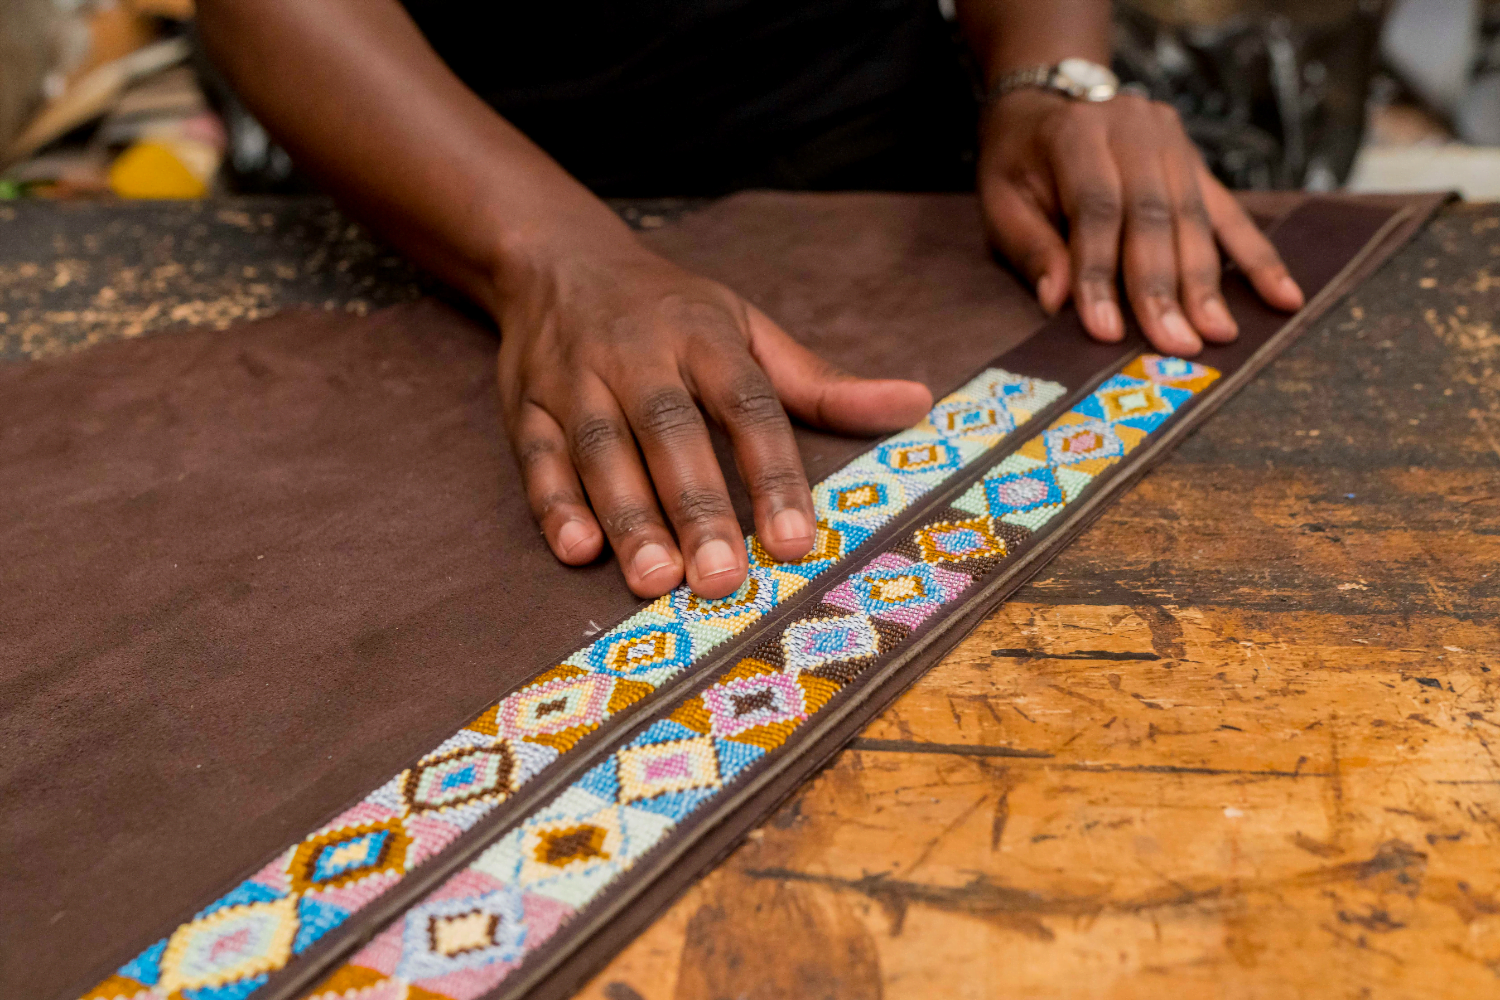 A Kenyan woman entrepreneur's hands rest on top of two leather belts with colourful beading that forms geometric patterns.